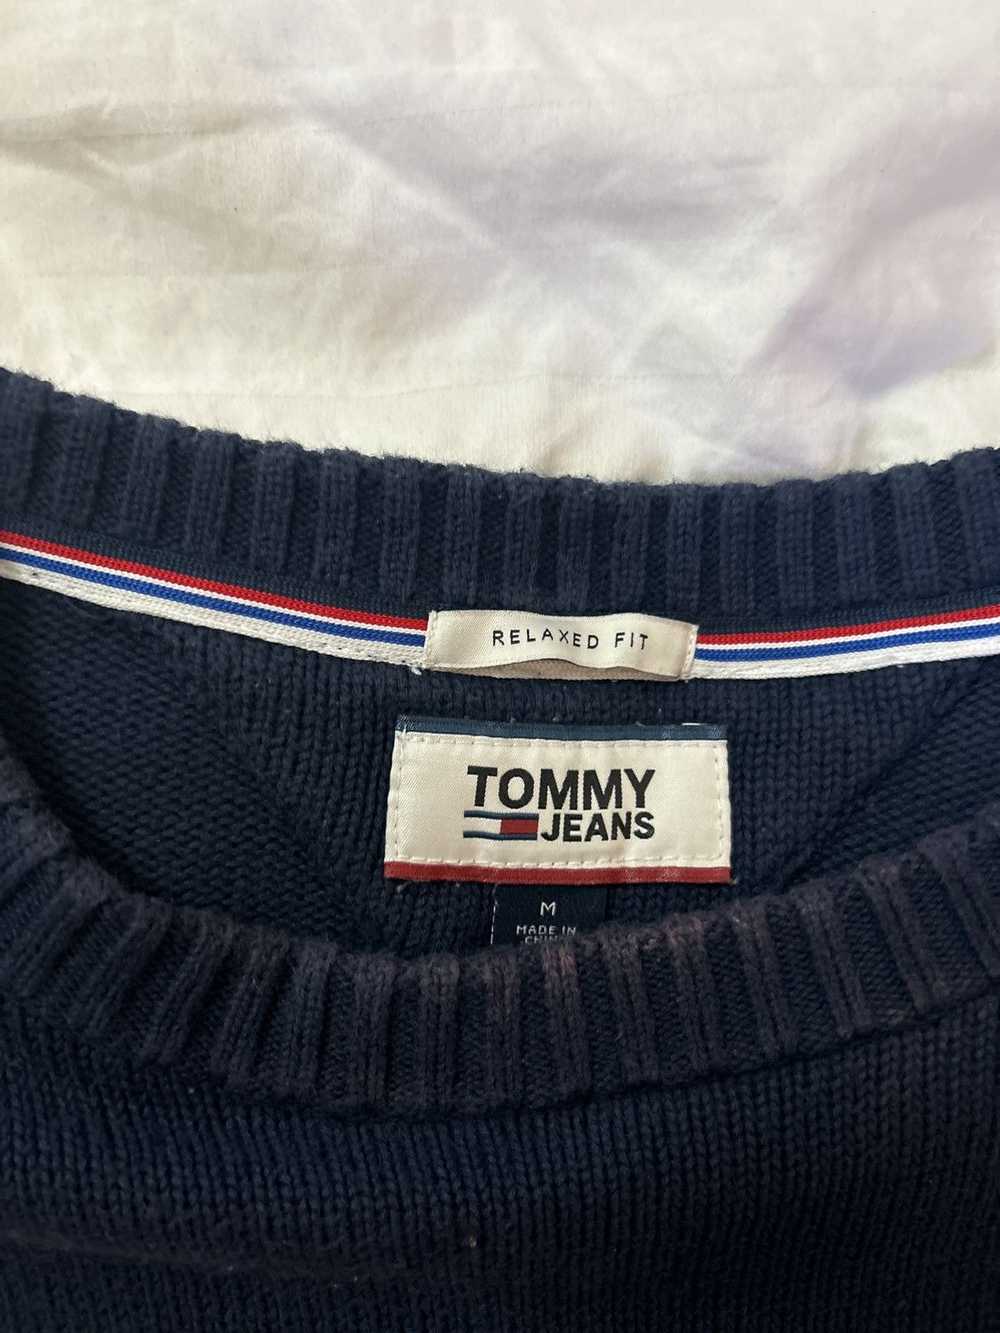 Tommy Hilfiger × Tommy Jeans Tommy Jeans Relaxed … - image 5